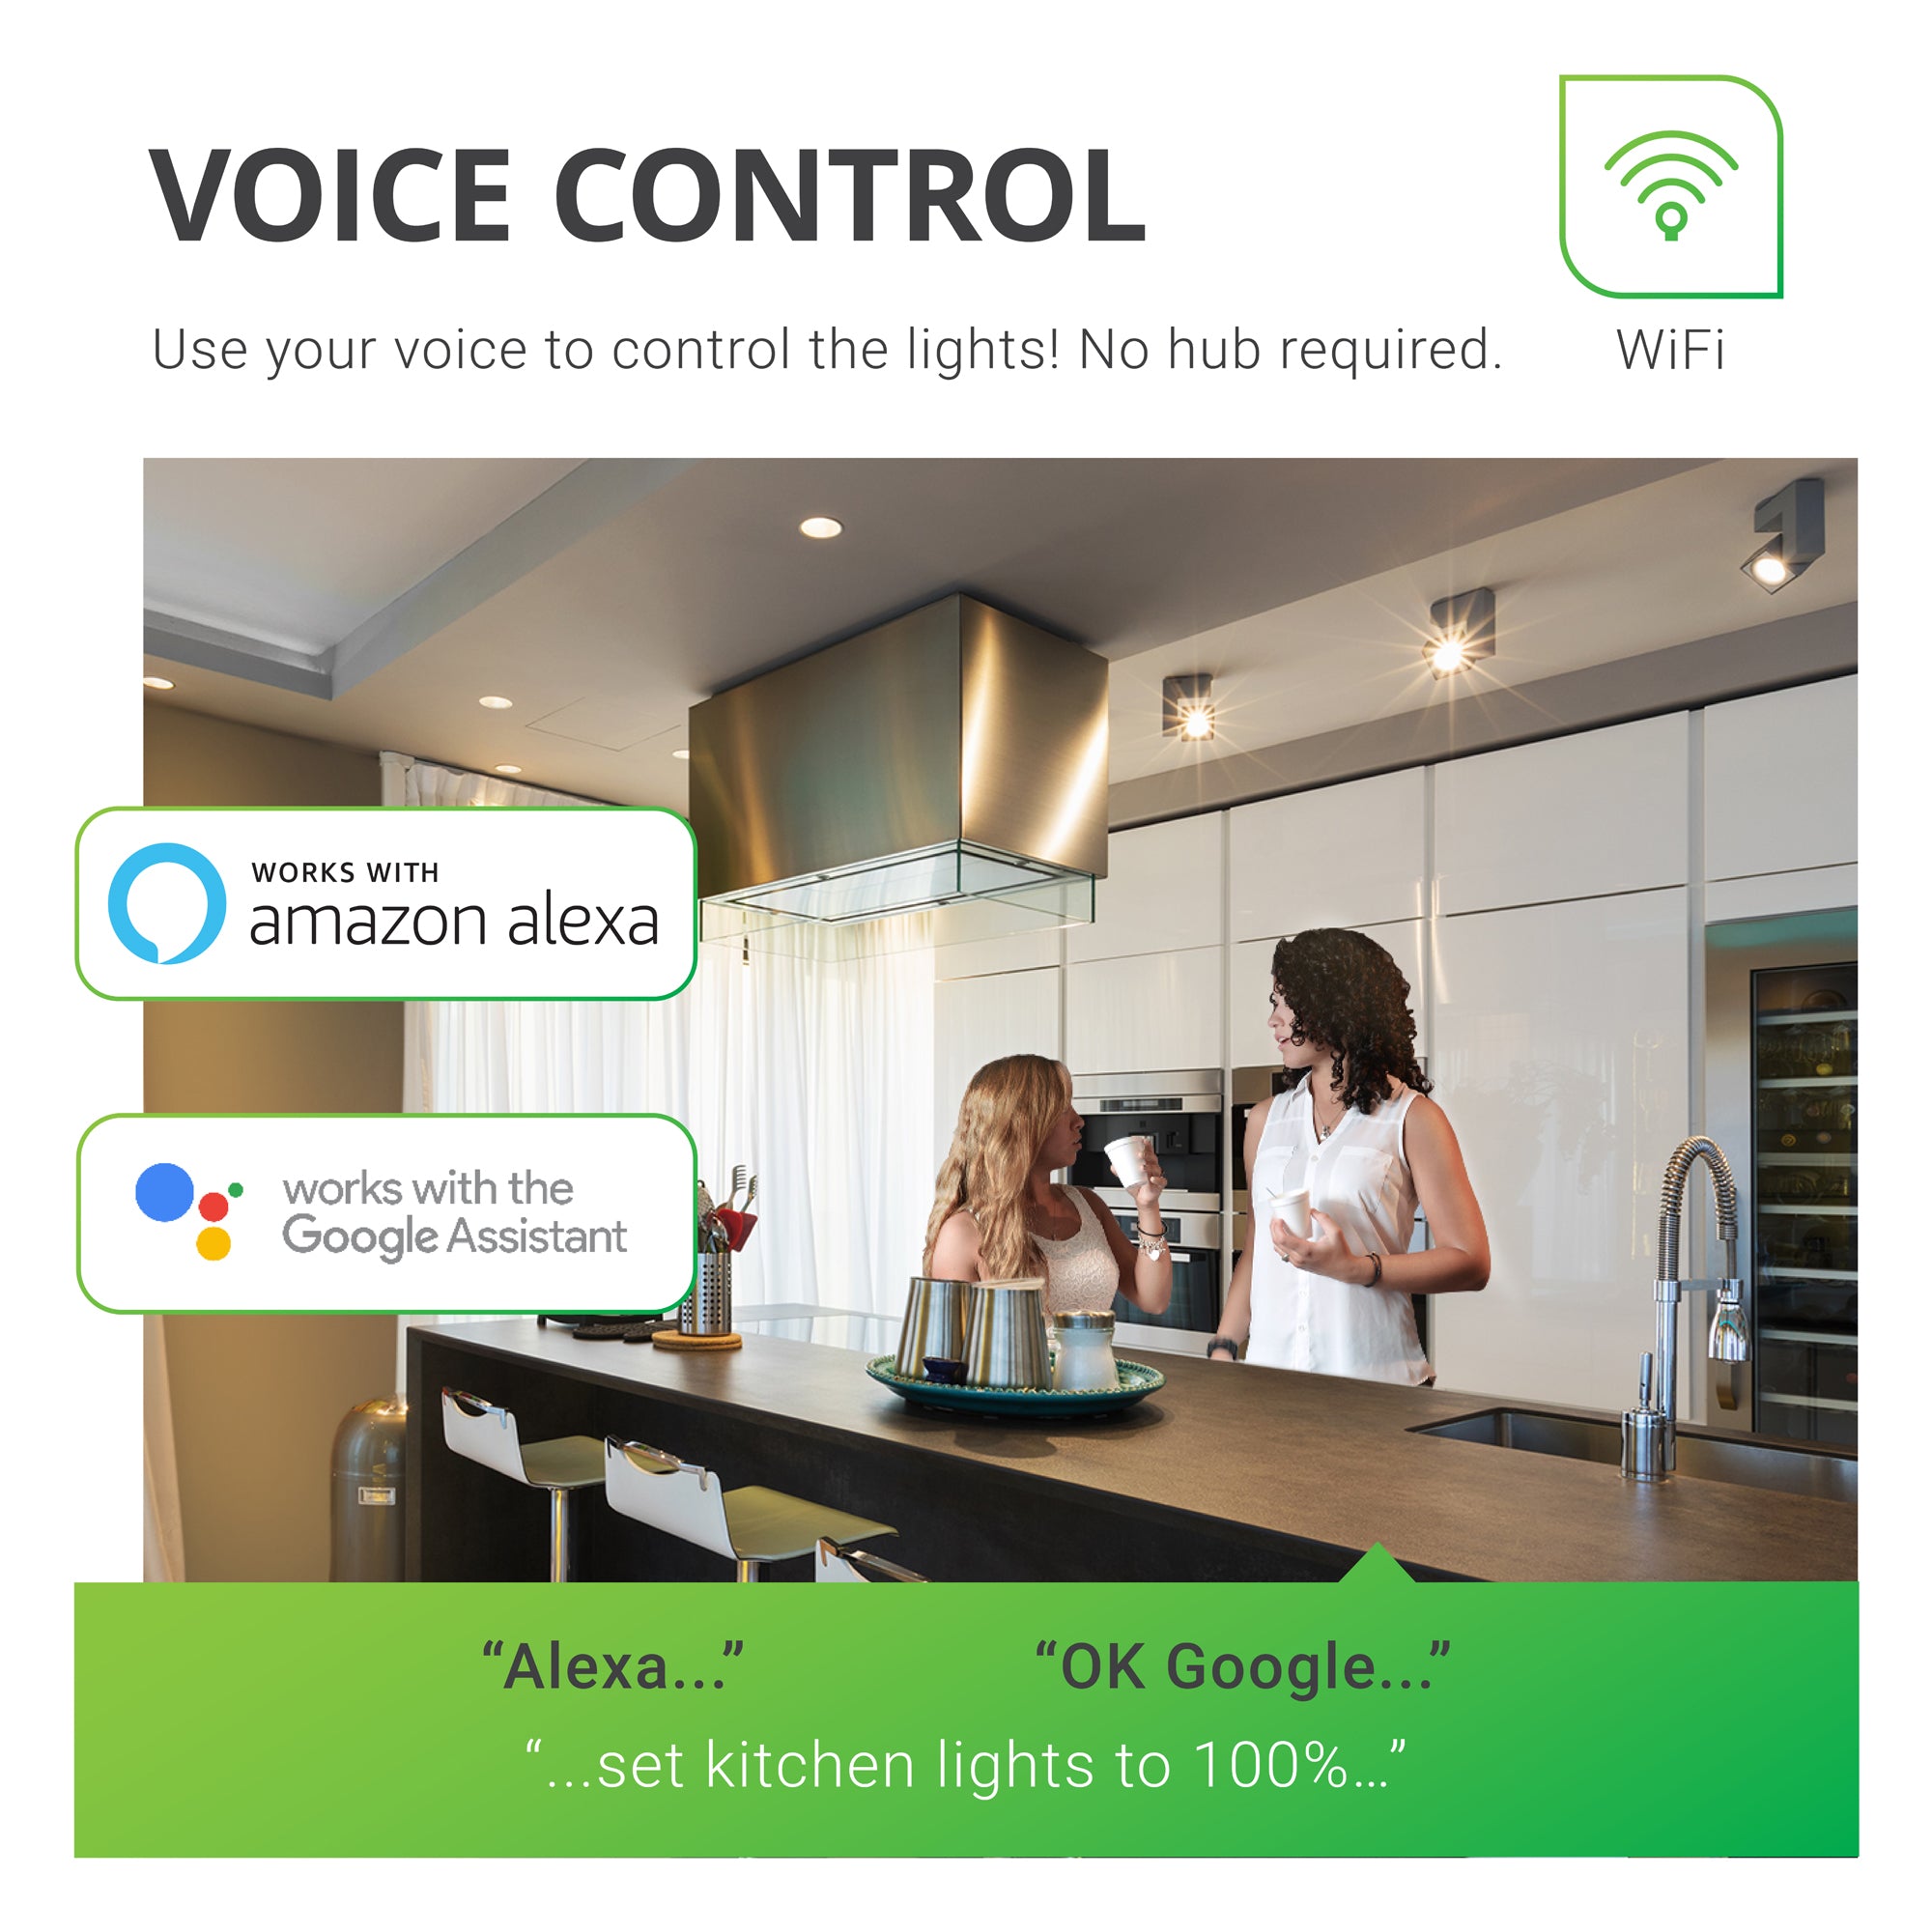 Use your voice to control the lights with your Sunco PAR20 LED Smart Bulb. No hub required for control. However, voice control works with Alexa and Google Assistant in coordination with the Smart Life App and your smart device.